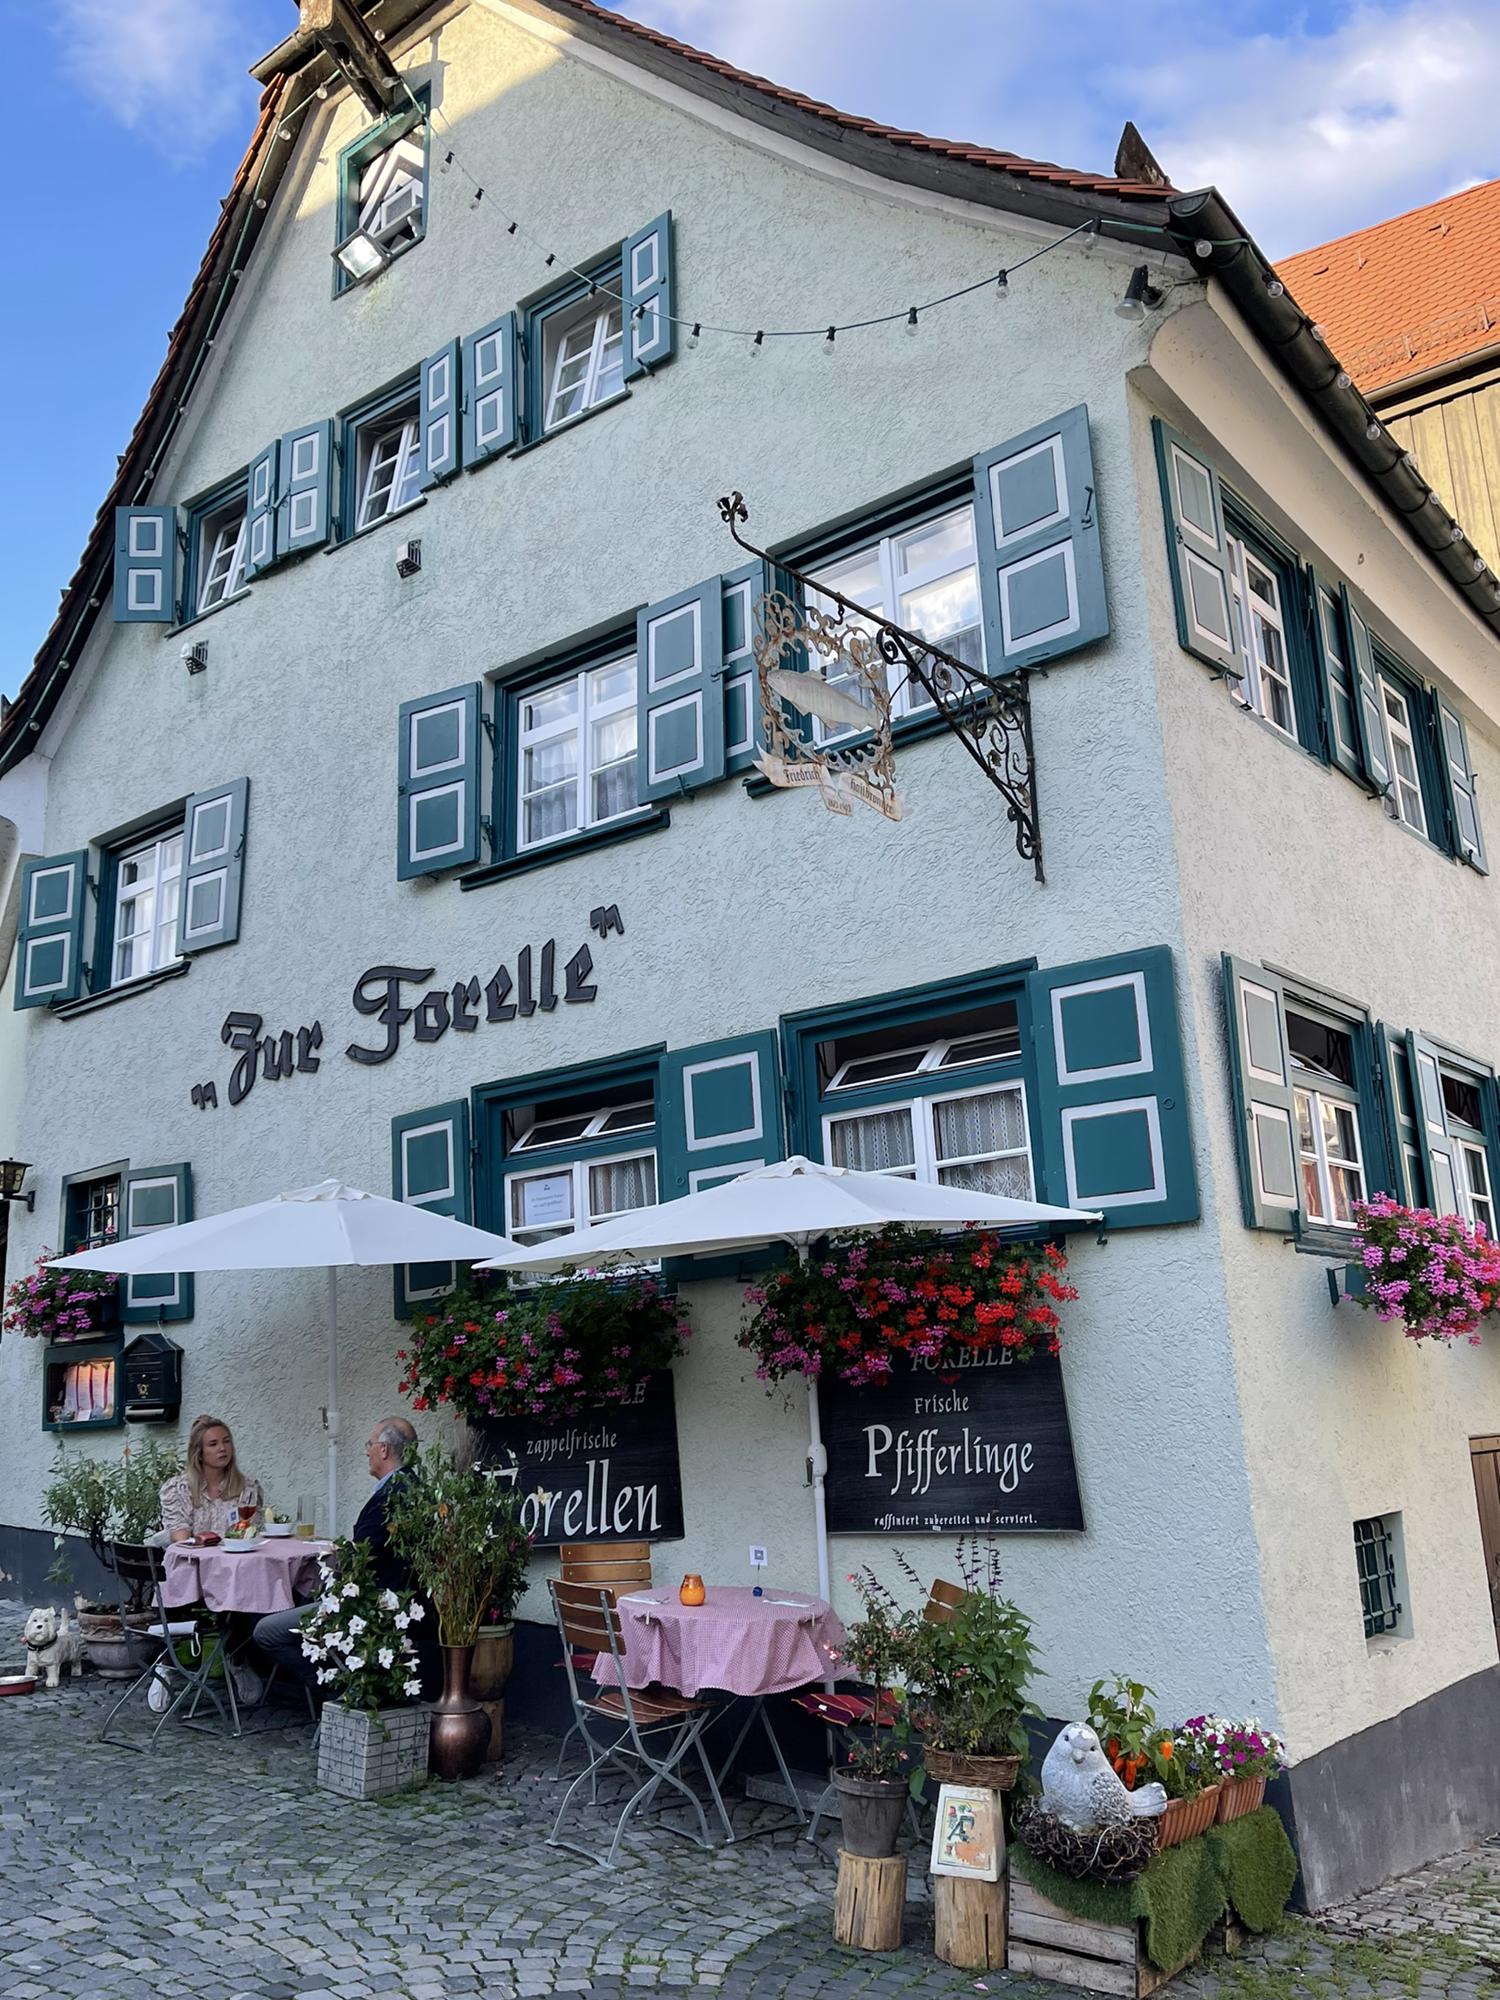 One of our favorite restaurants in Ulm